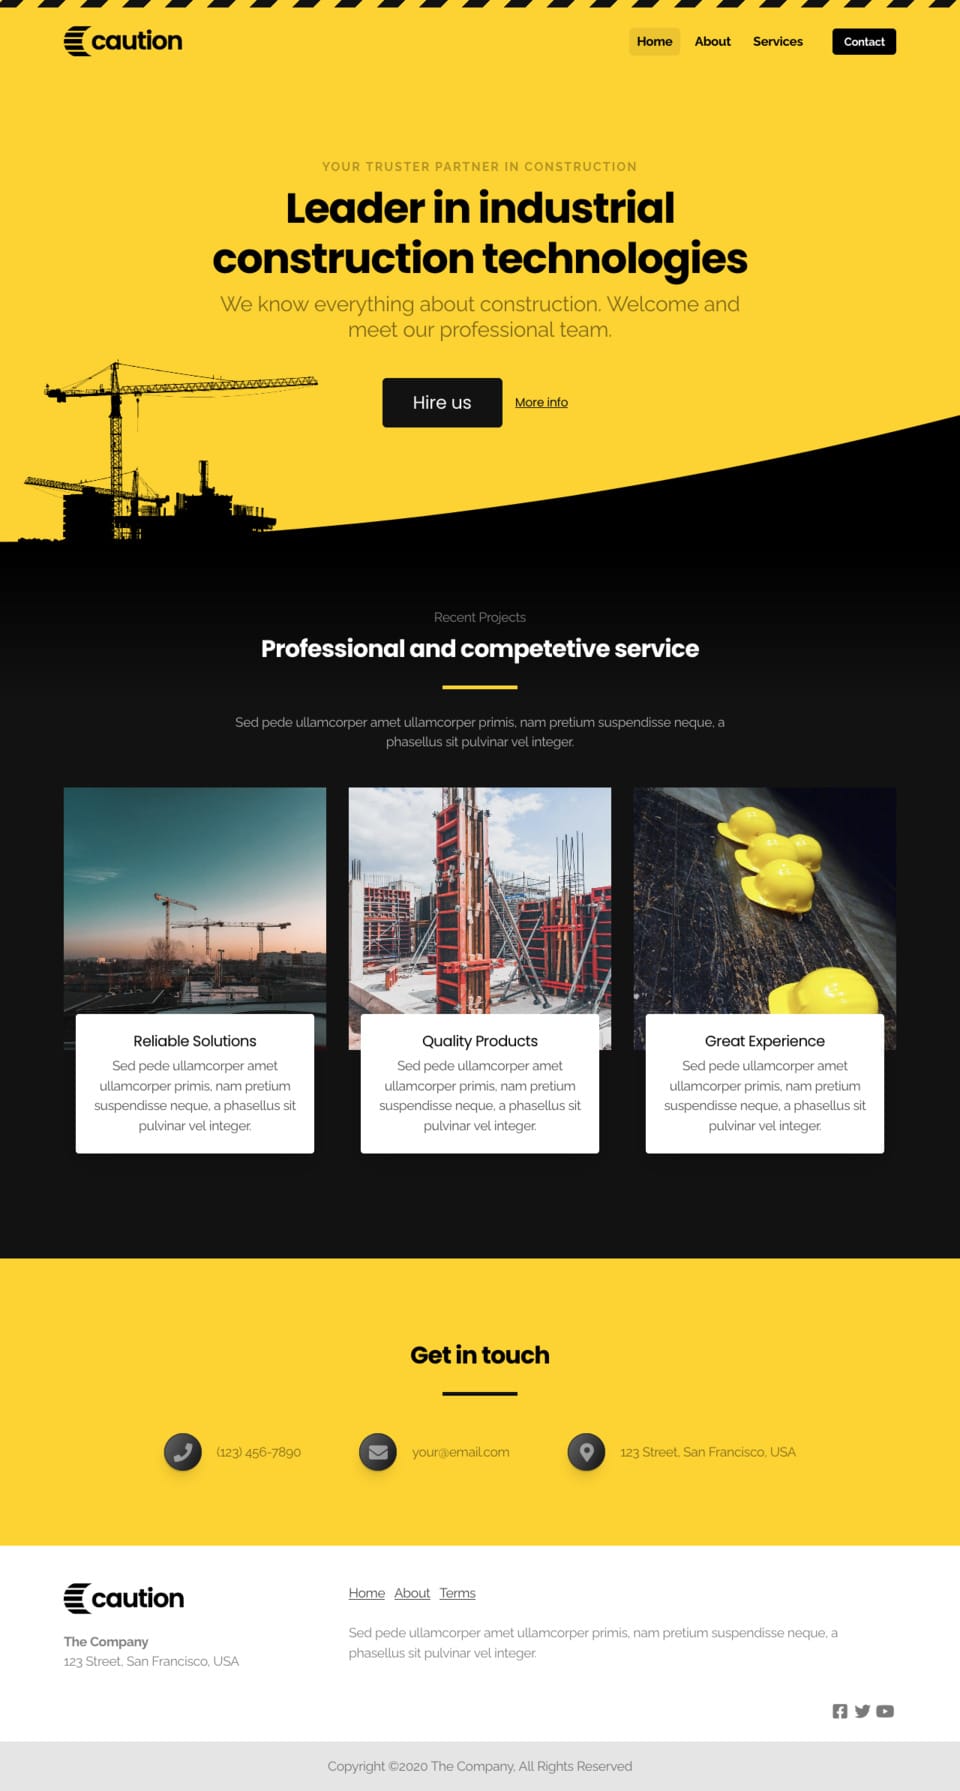 Caution Website Template - Ideal for construction companies, home builders, roofers, architects, and residential service providers looking for a professional online presence.